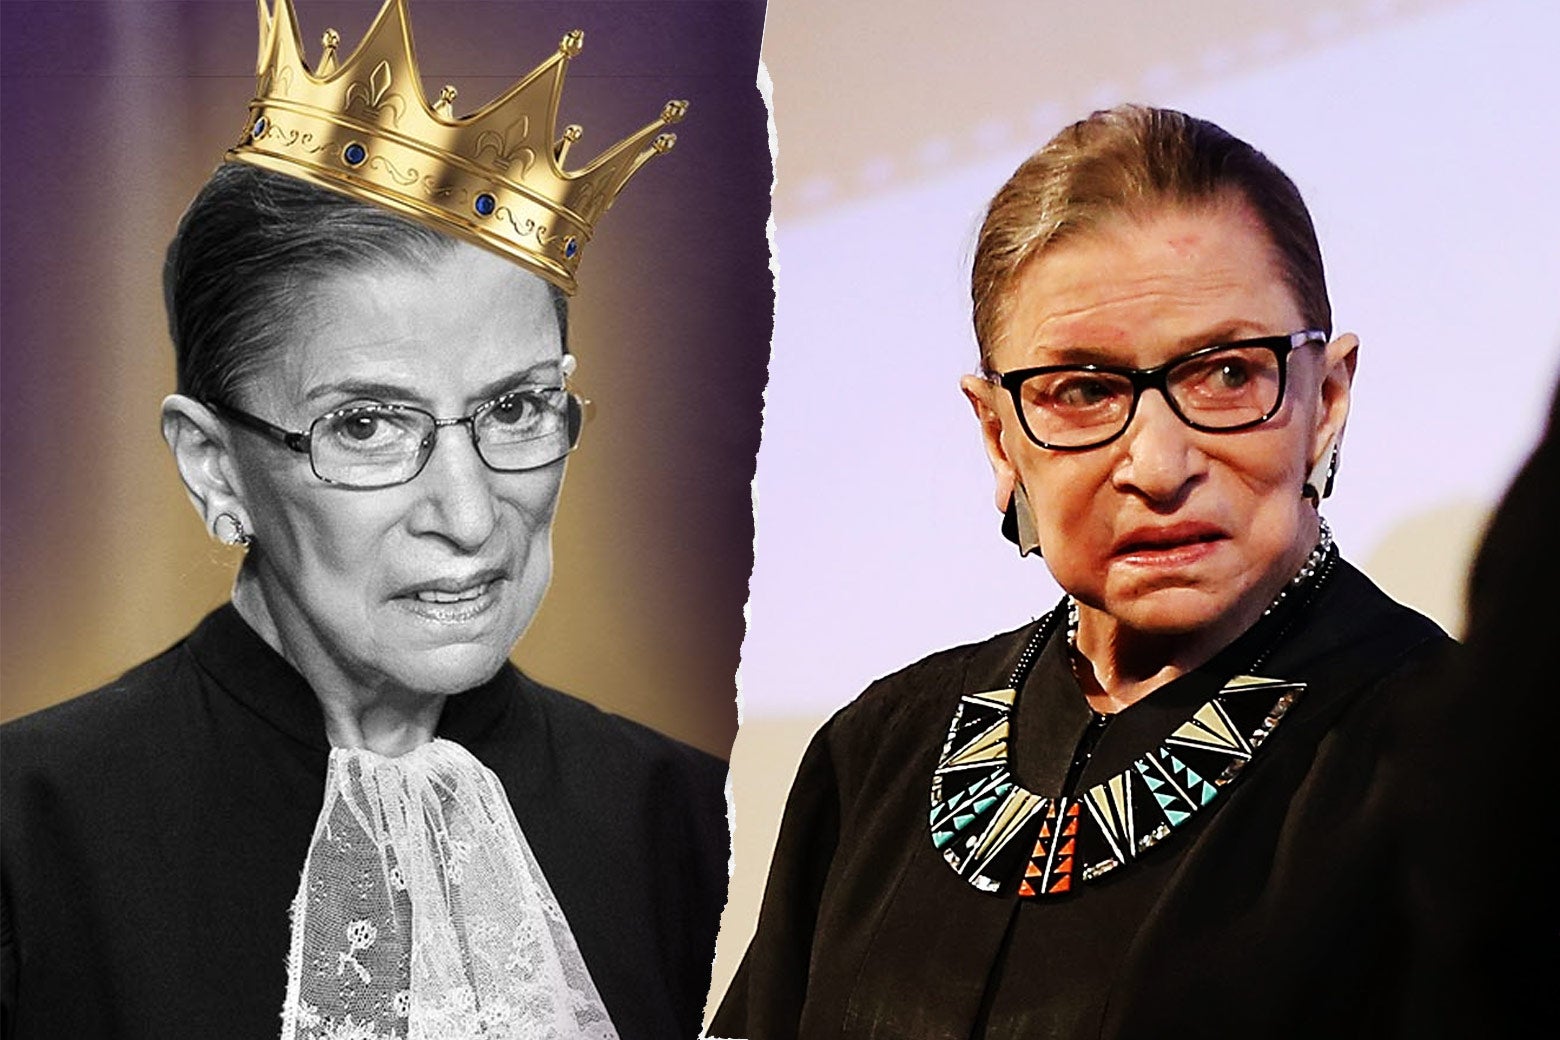 At left, Ruth Bader Ginsburg with a Biggie-style crown. At right, RBG speaks at an event. 